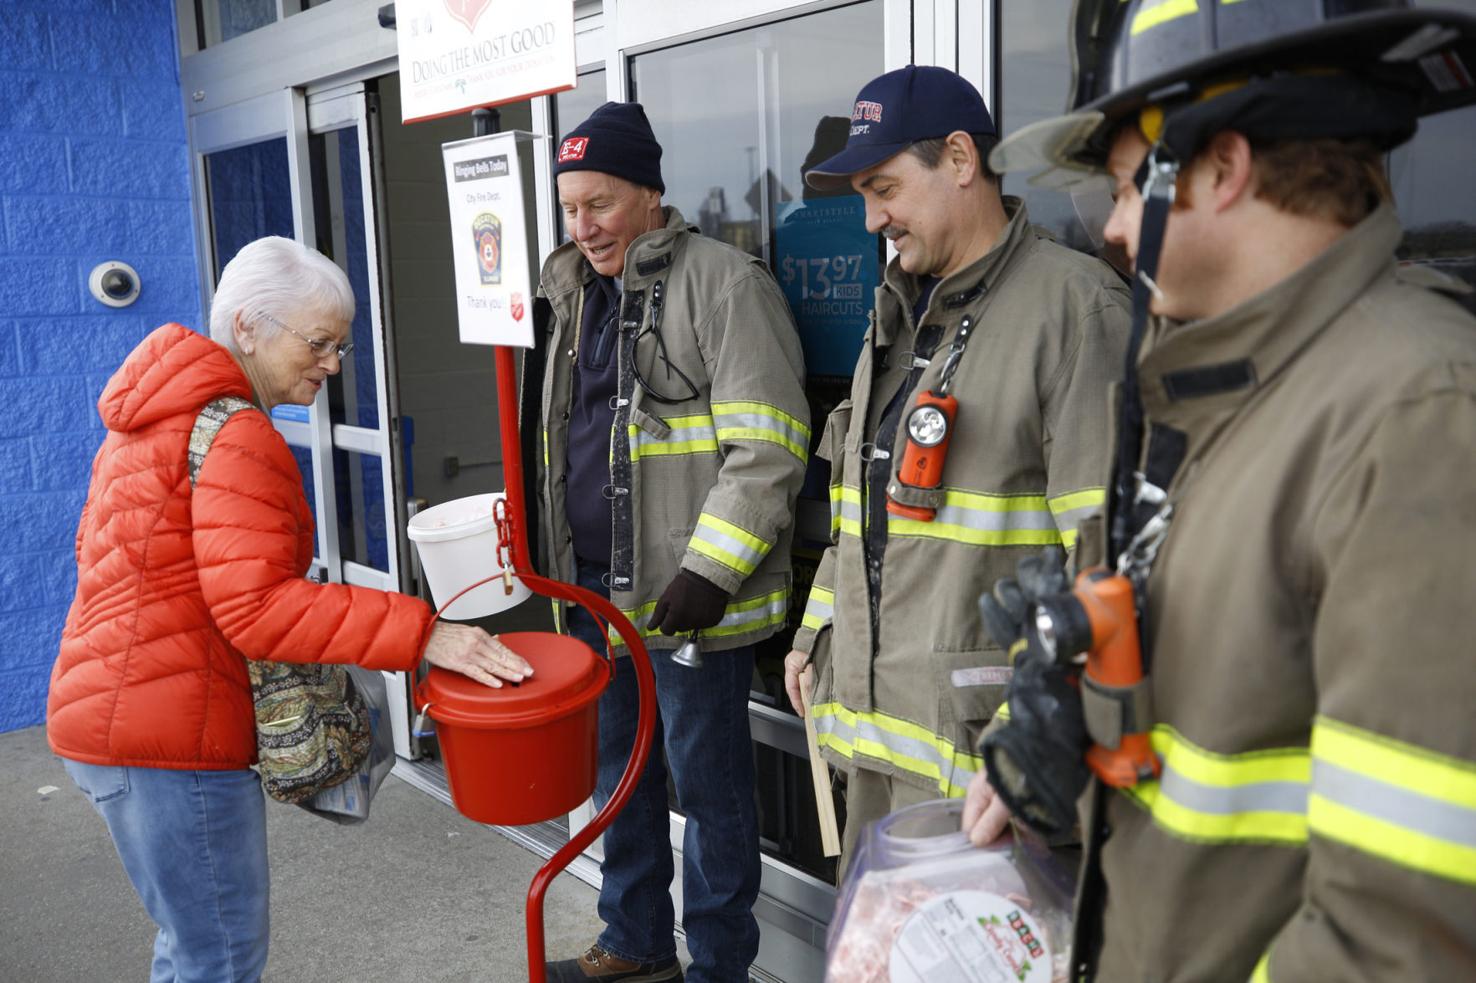 Decatur Fire Department wins Salvation Army bellringing competition